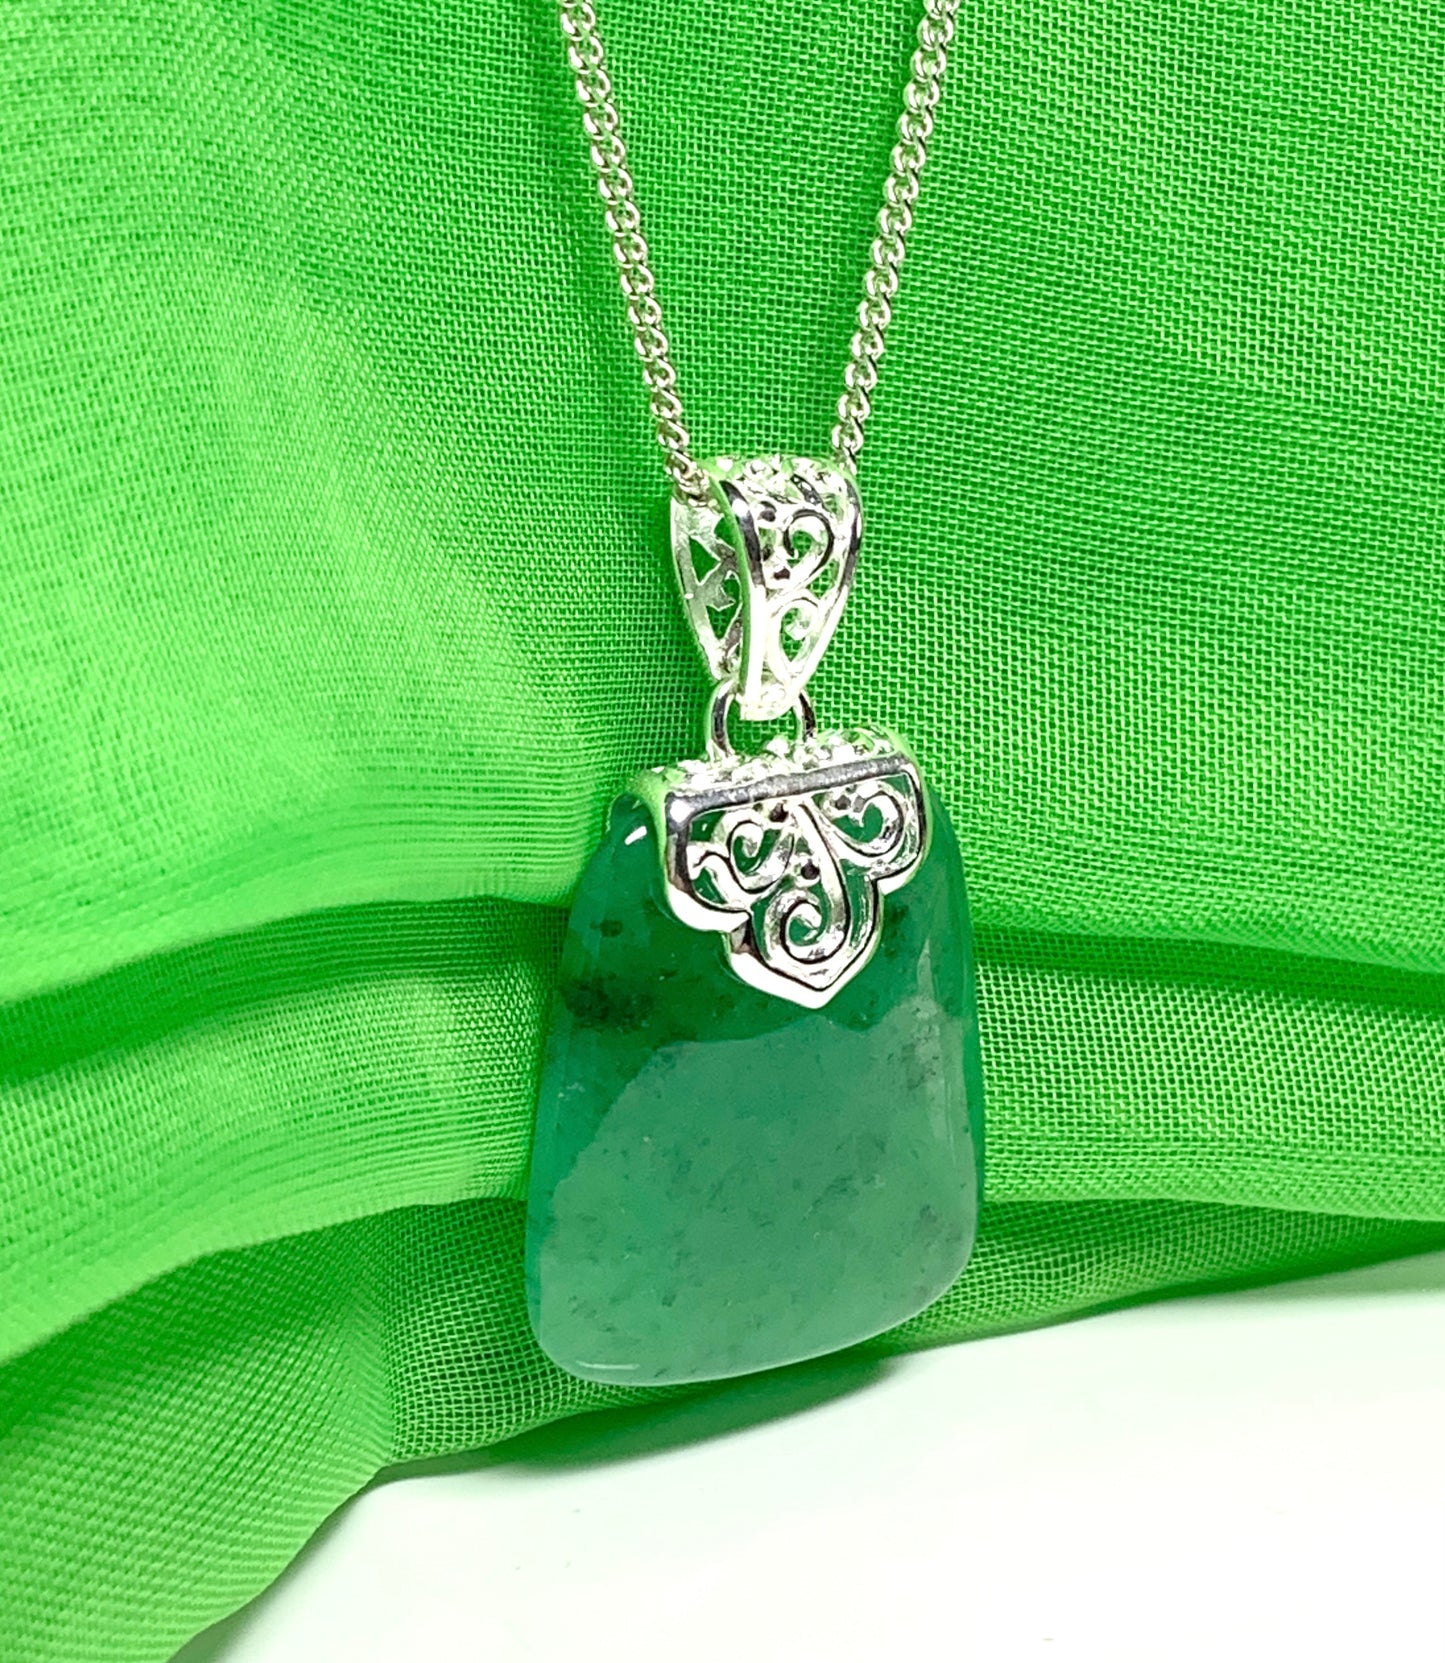 Sterling Silver Cushion Shaped Real Green Jade Necklace Pendant